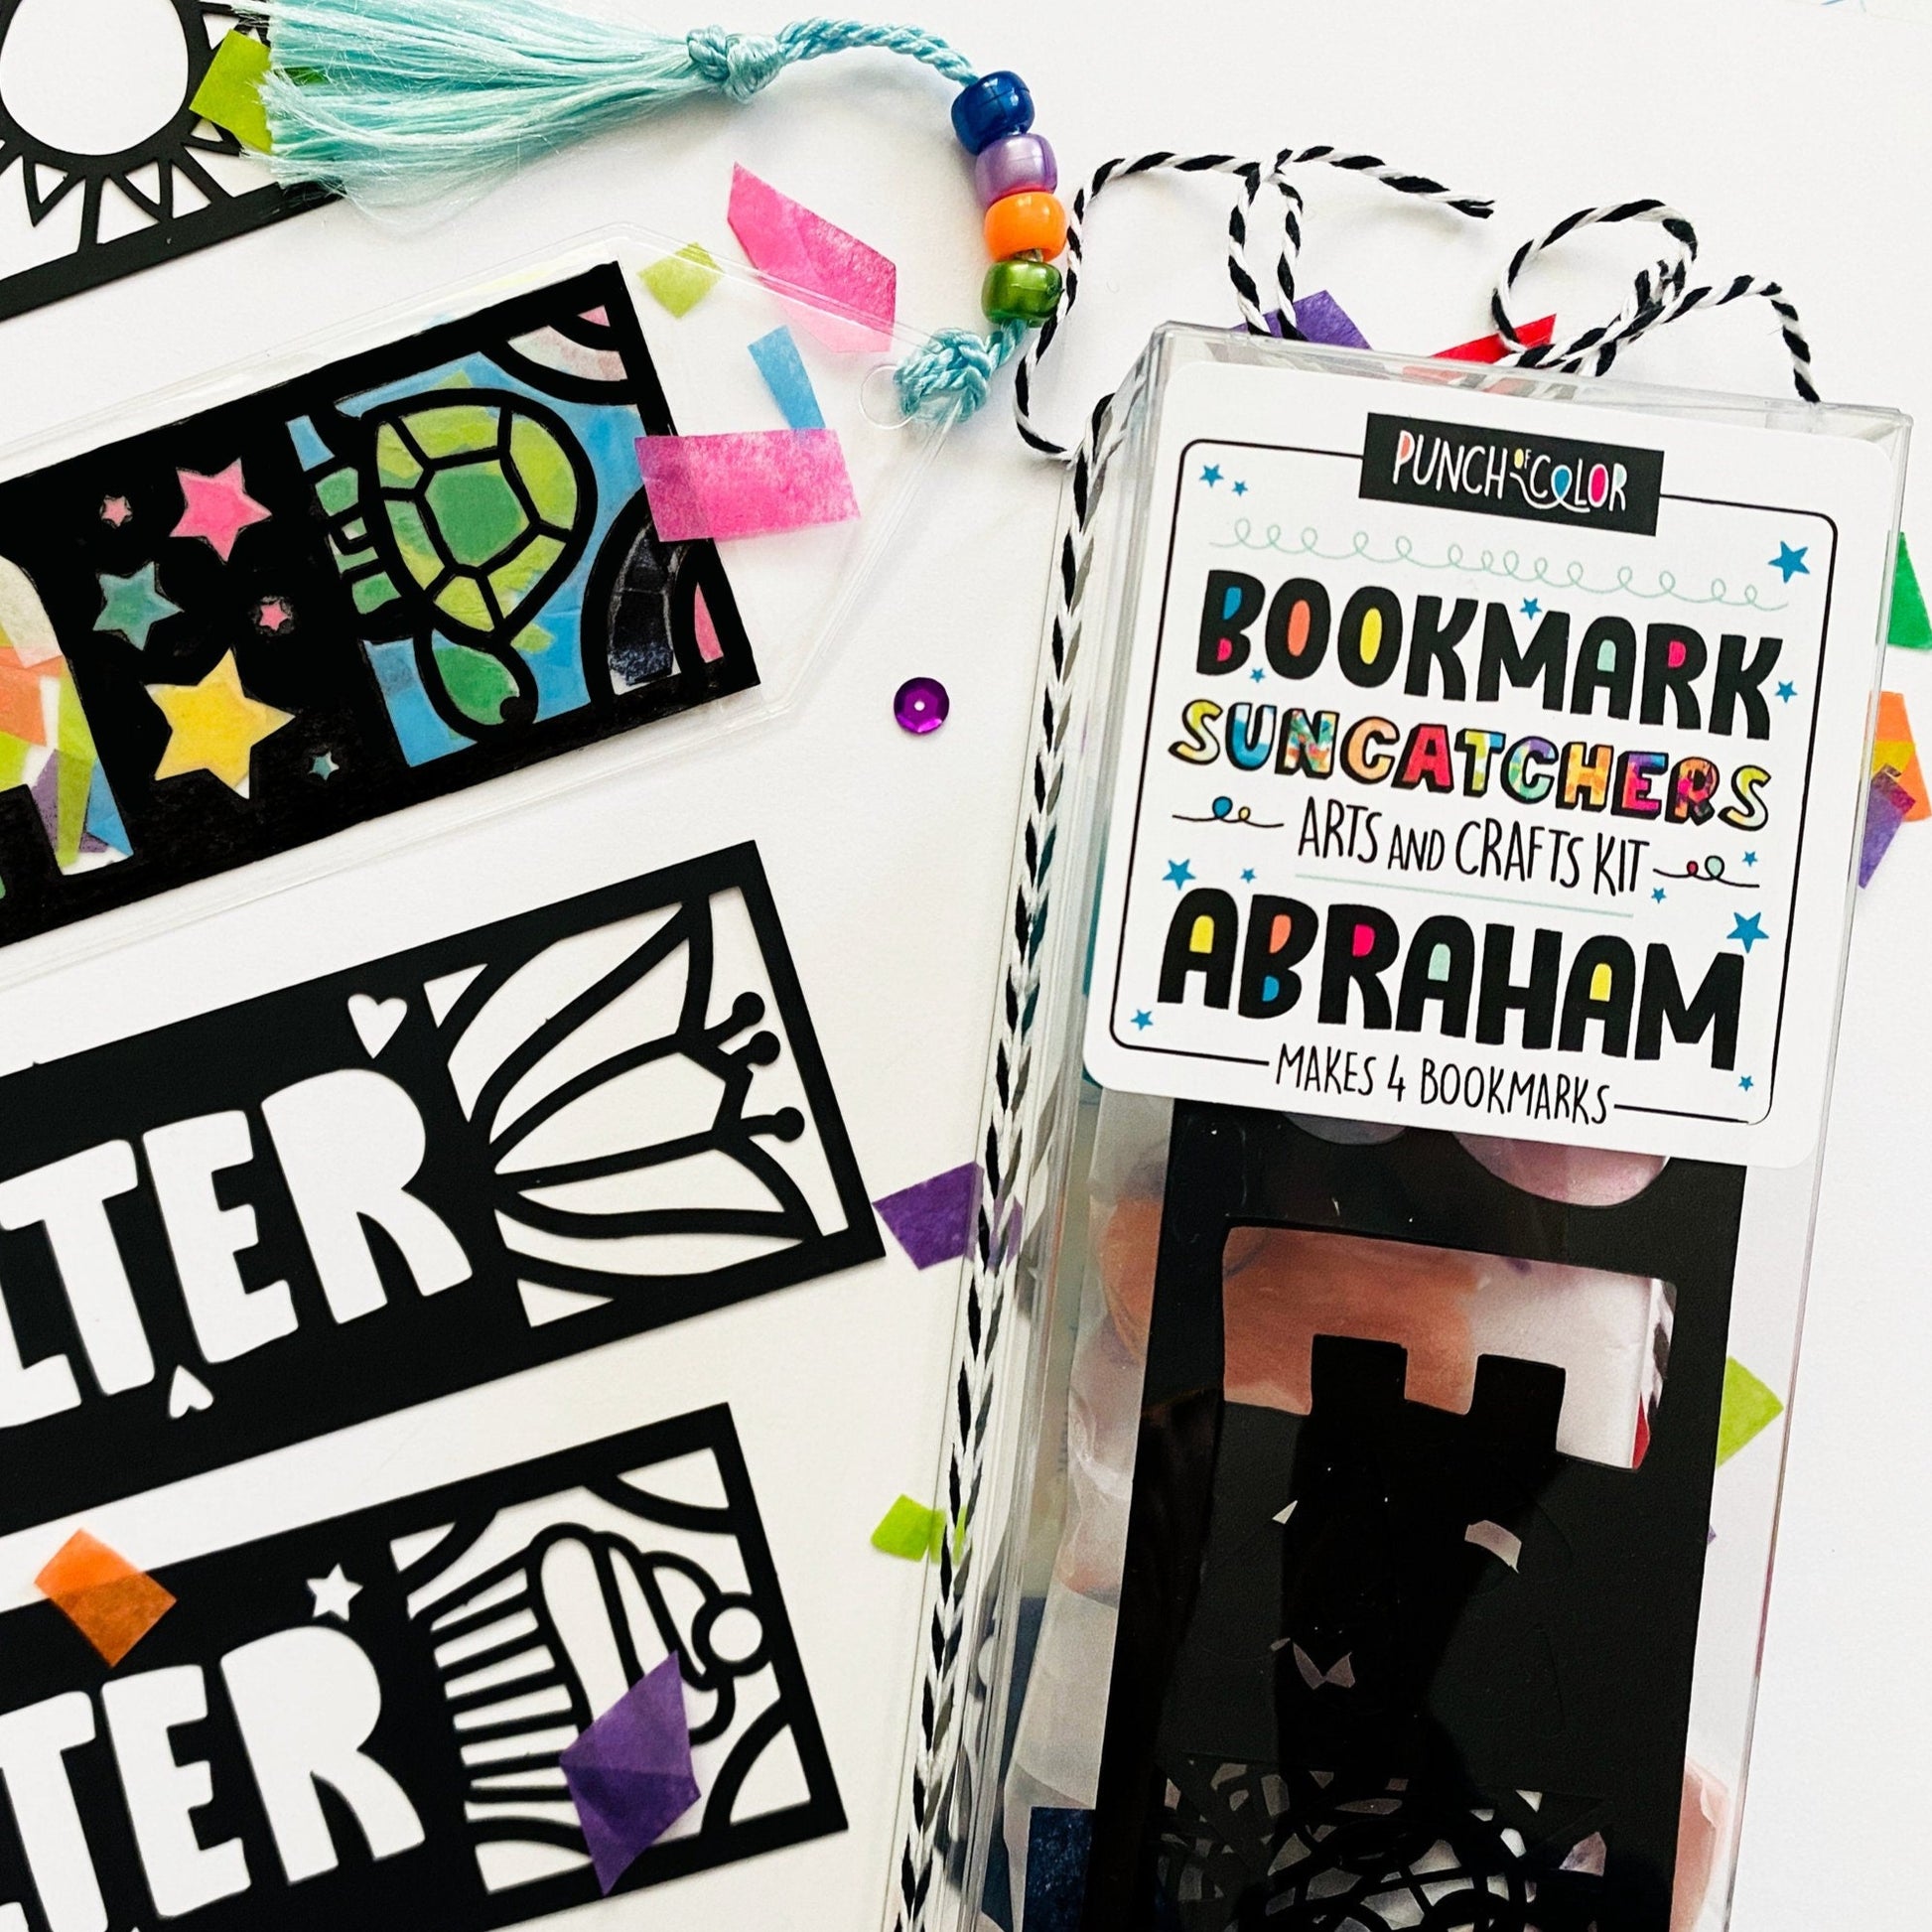 Bookmark making kit for kids gift. Arts and crafts custom reader activity.